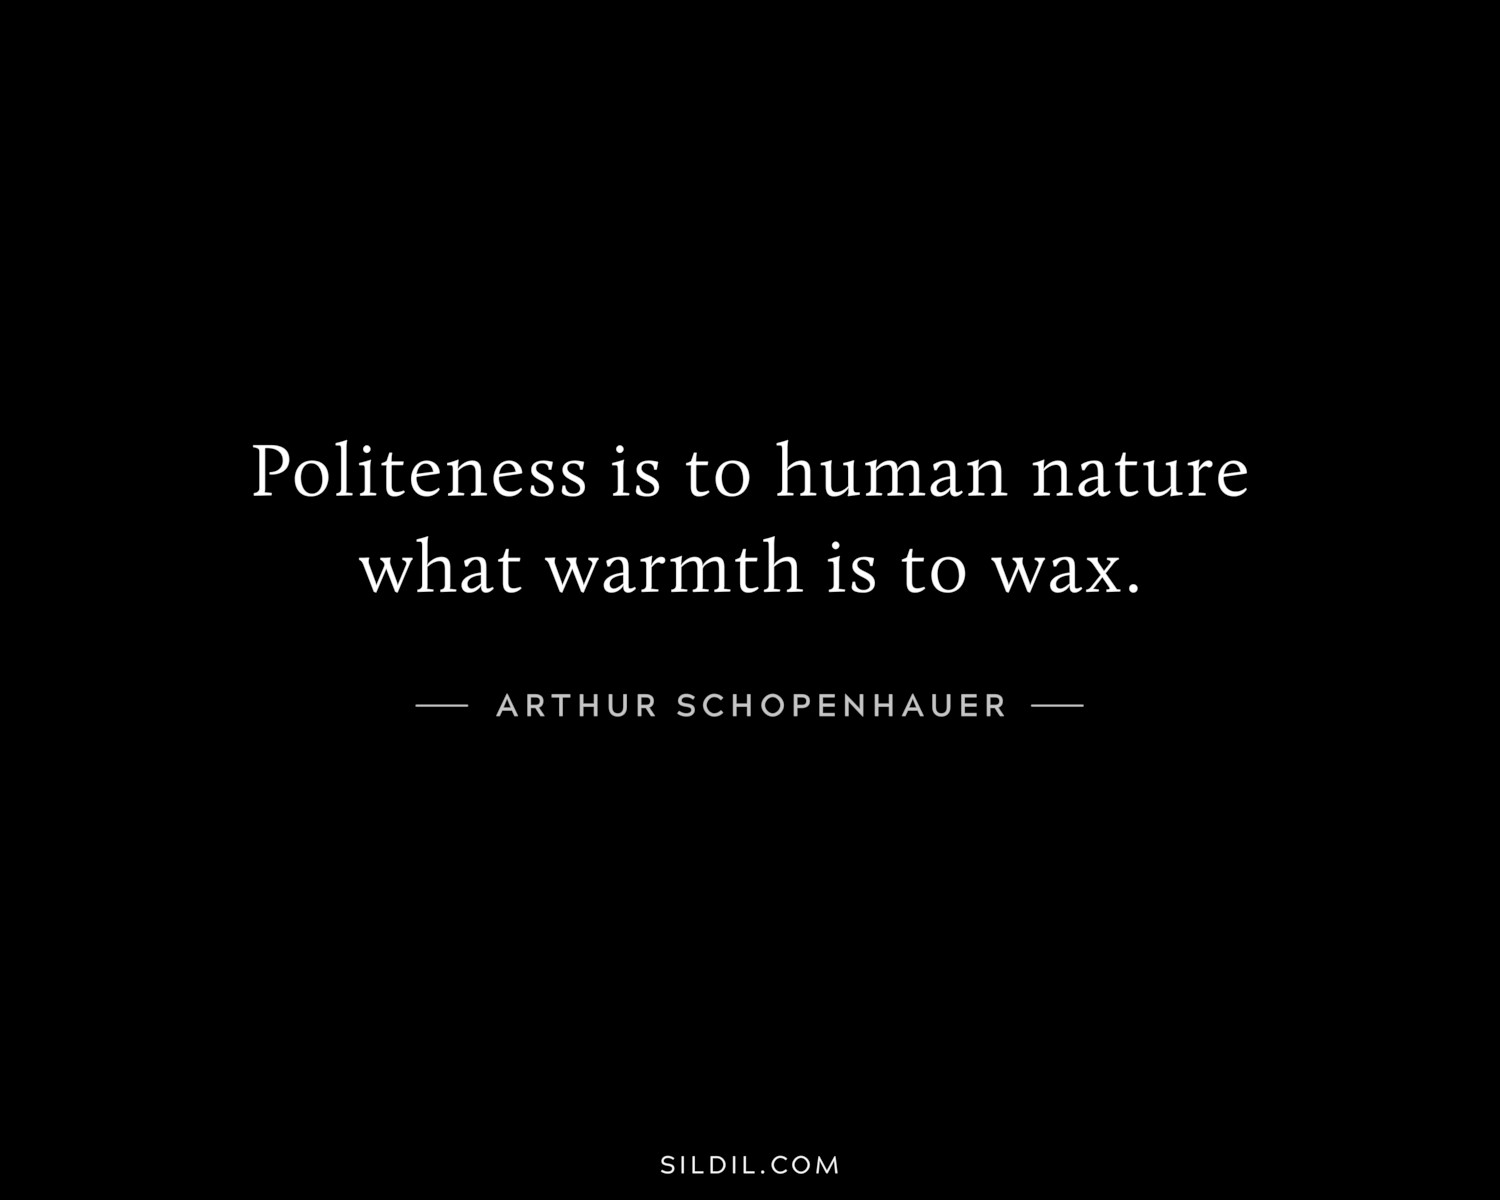 Politeness is to human nature what warmth is to wax.